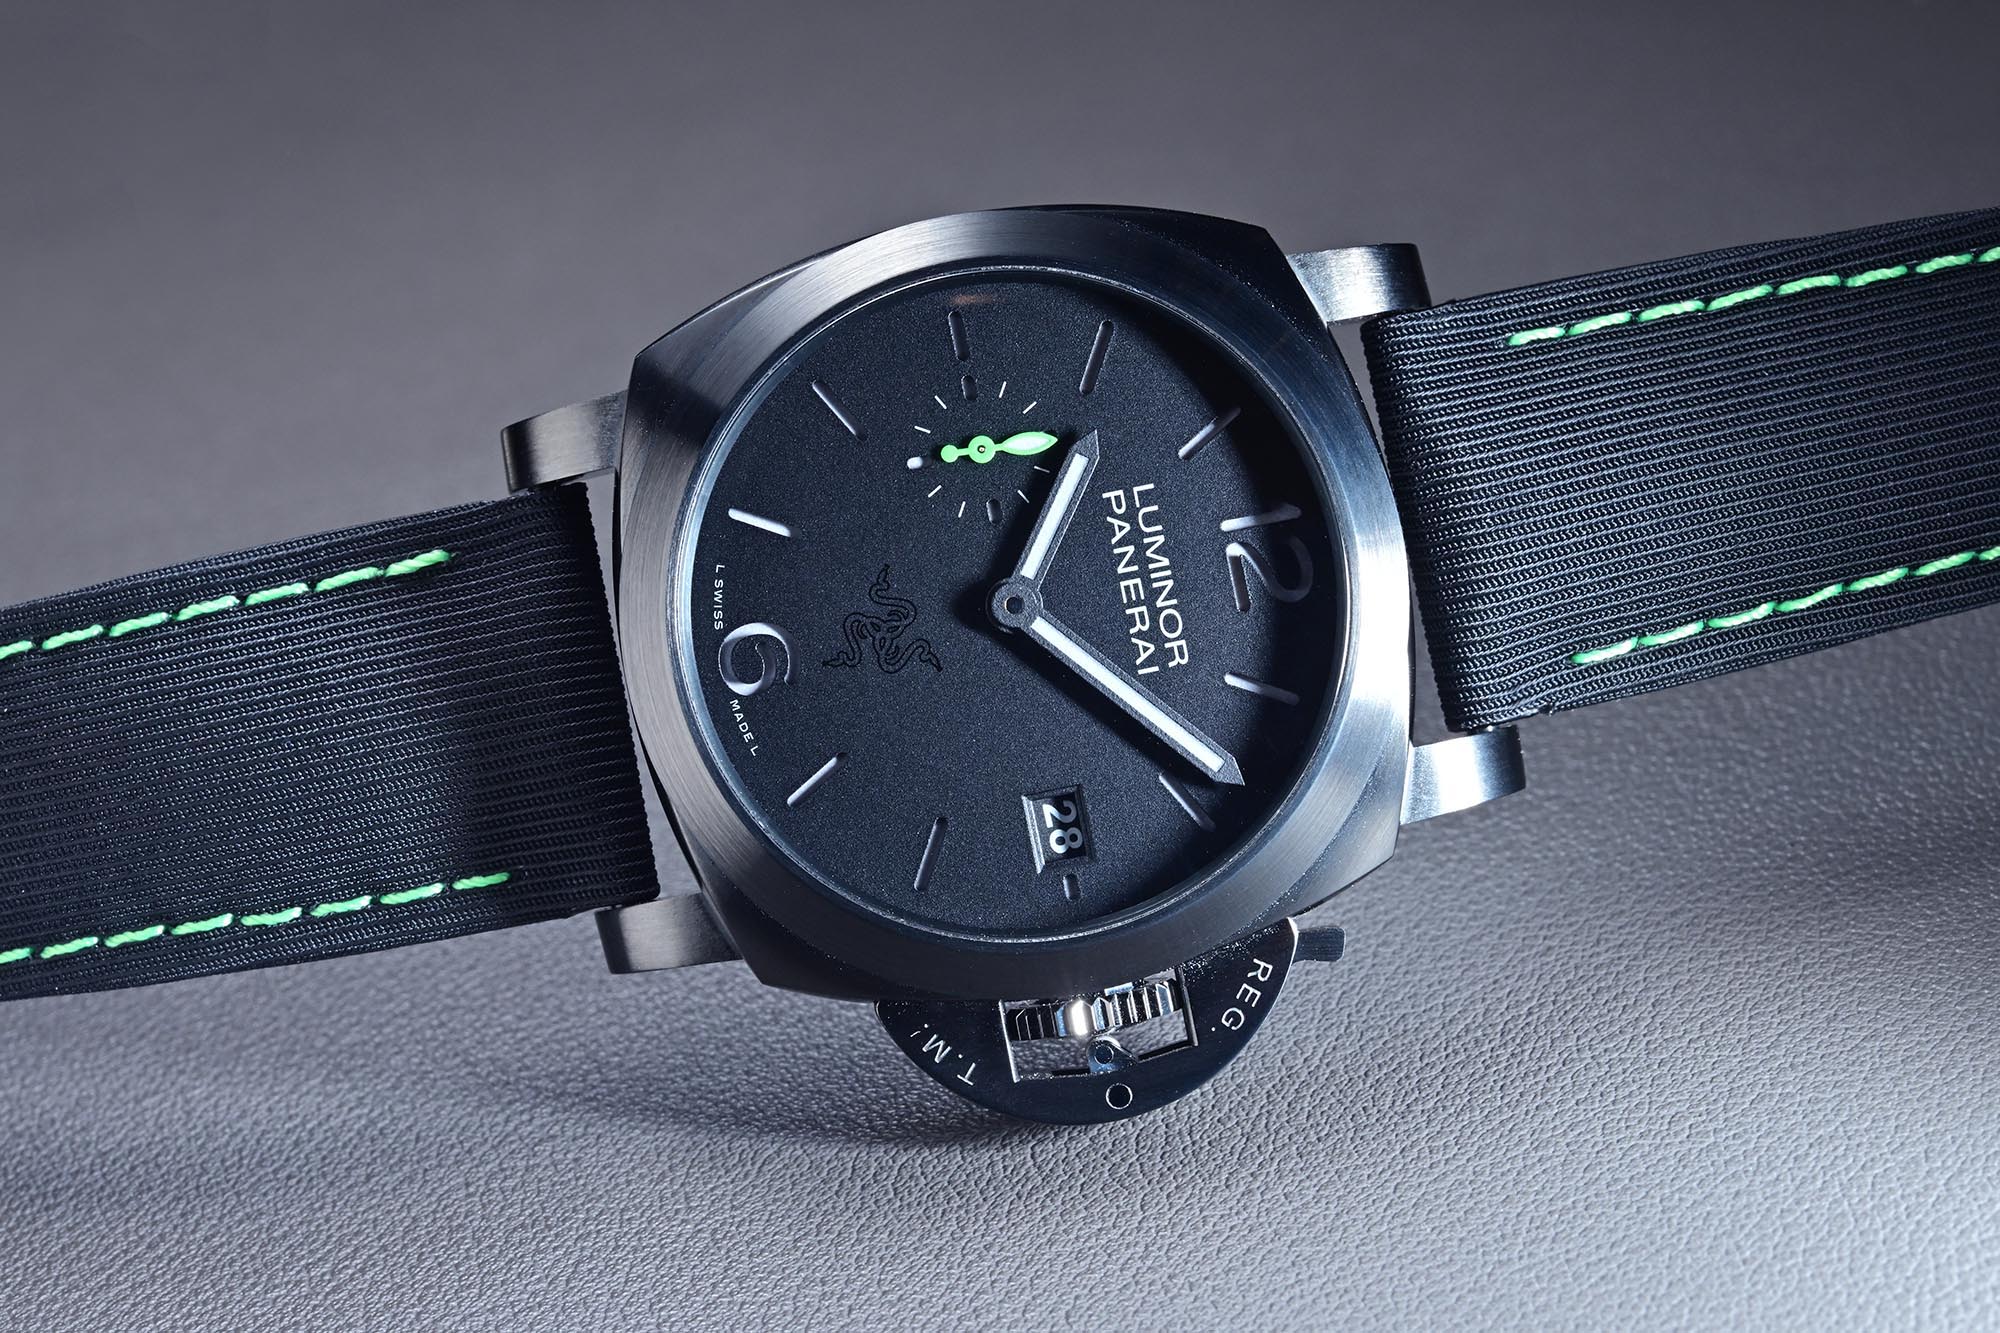 The Panerai Luminor Quaranta Razer Special Edition is an out of left field  collaboration that somehow makes sense